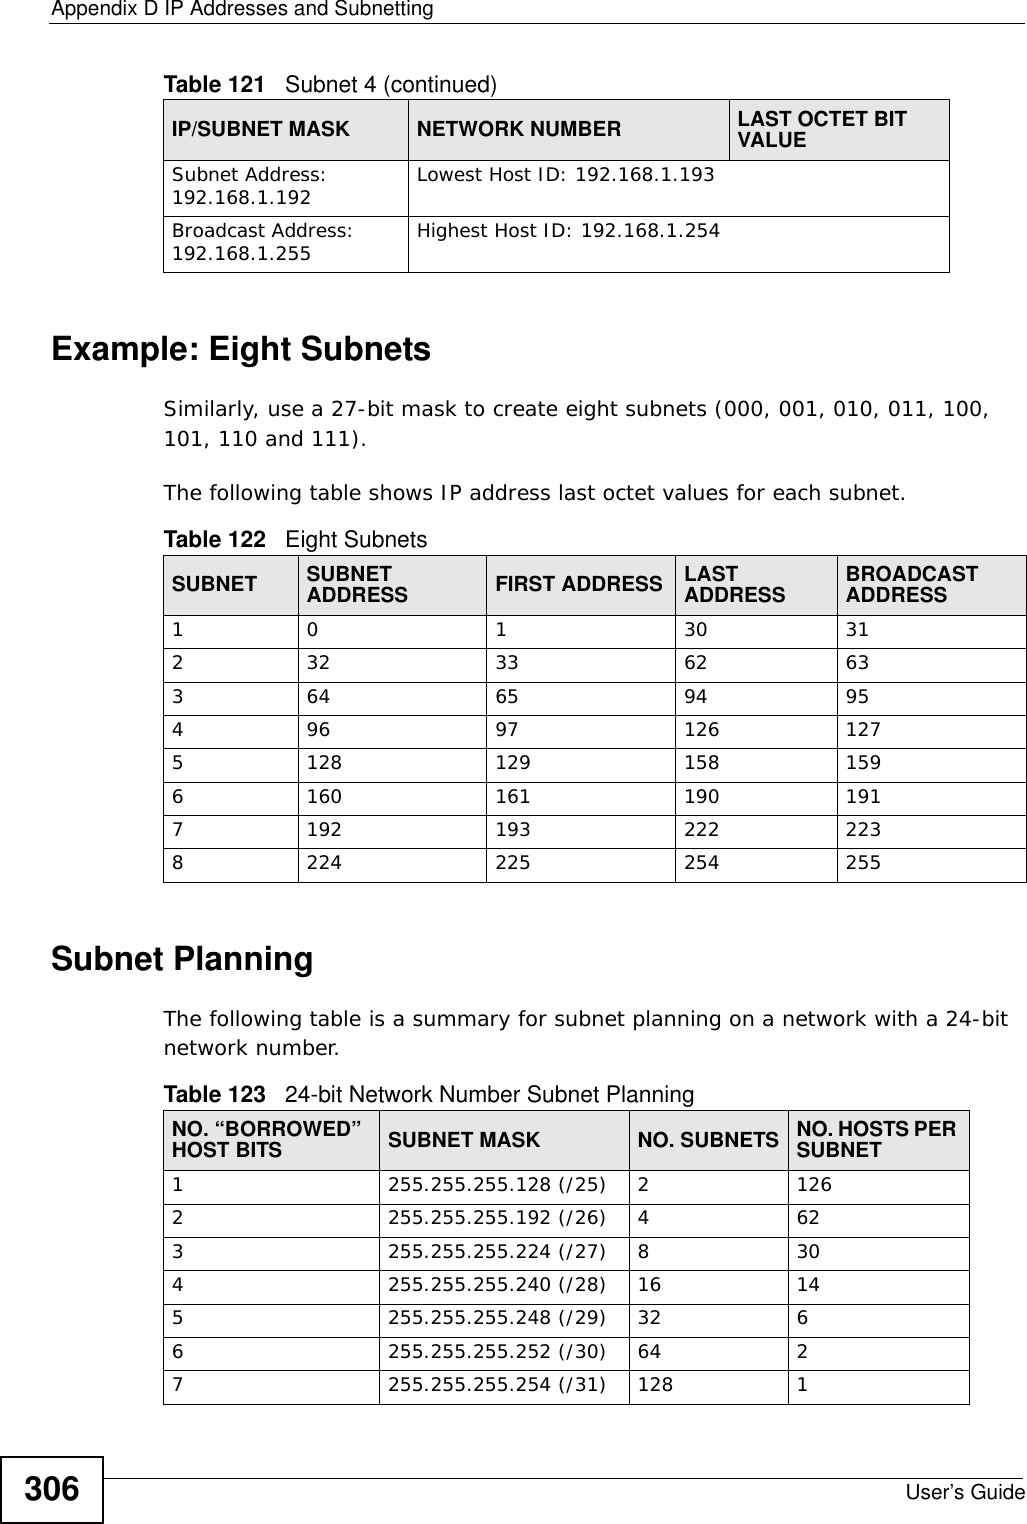 Appendix D IP Addresses and SubnettingUser’s Guide306Example: Eight SubnetsSimilarly, use a 27-bit mask to create eight subnets (000, 001, 010, 011, 100, 101, 110 and 111). The following table shows IP address last octet values for each subnet.Subnet PlanningThe following table is a summary for subnet planning on a network with a 24-bit network number.Subnet Address: 192.168.1.192 Lowest Host ID: 192.168.1.193Broadcast Address: 192.168.1.255 Highest Host ID: 192.168.1.254Table 121   Subnet 4 (continued)IP/SUBNET MASK NETWORK NUMBER LAST OCTET BIT VALUETable 122   Eight SubnetsSUBNET SUBNET ADDRESS FIRST ADDRESS LAST ADDRESS BROADCAST ADDRESS1 0 1 30 31232 33 62 63364 65 94 95496 97 126 1275128 129 158 1596160 161 190 1917192 193 222 2238224 225 254 255Table 123   24-bit Network Number Subnet PlanningNO. “BORROWED” HOST BITS SUBNET MASK NO. SUBNETS NO. HOSTS PER SUBNET1255.255.255.128 (/25) 21262255.255.255.192 (/26) 4623255.255.255.224 (/27) 8304255.255.255.240 (/28) 16 145255.255.255.248 (/29) 32 66255.255.255.252 (/30) 64 27255.255.255.254 (/31) 128 1